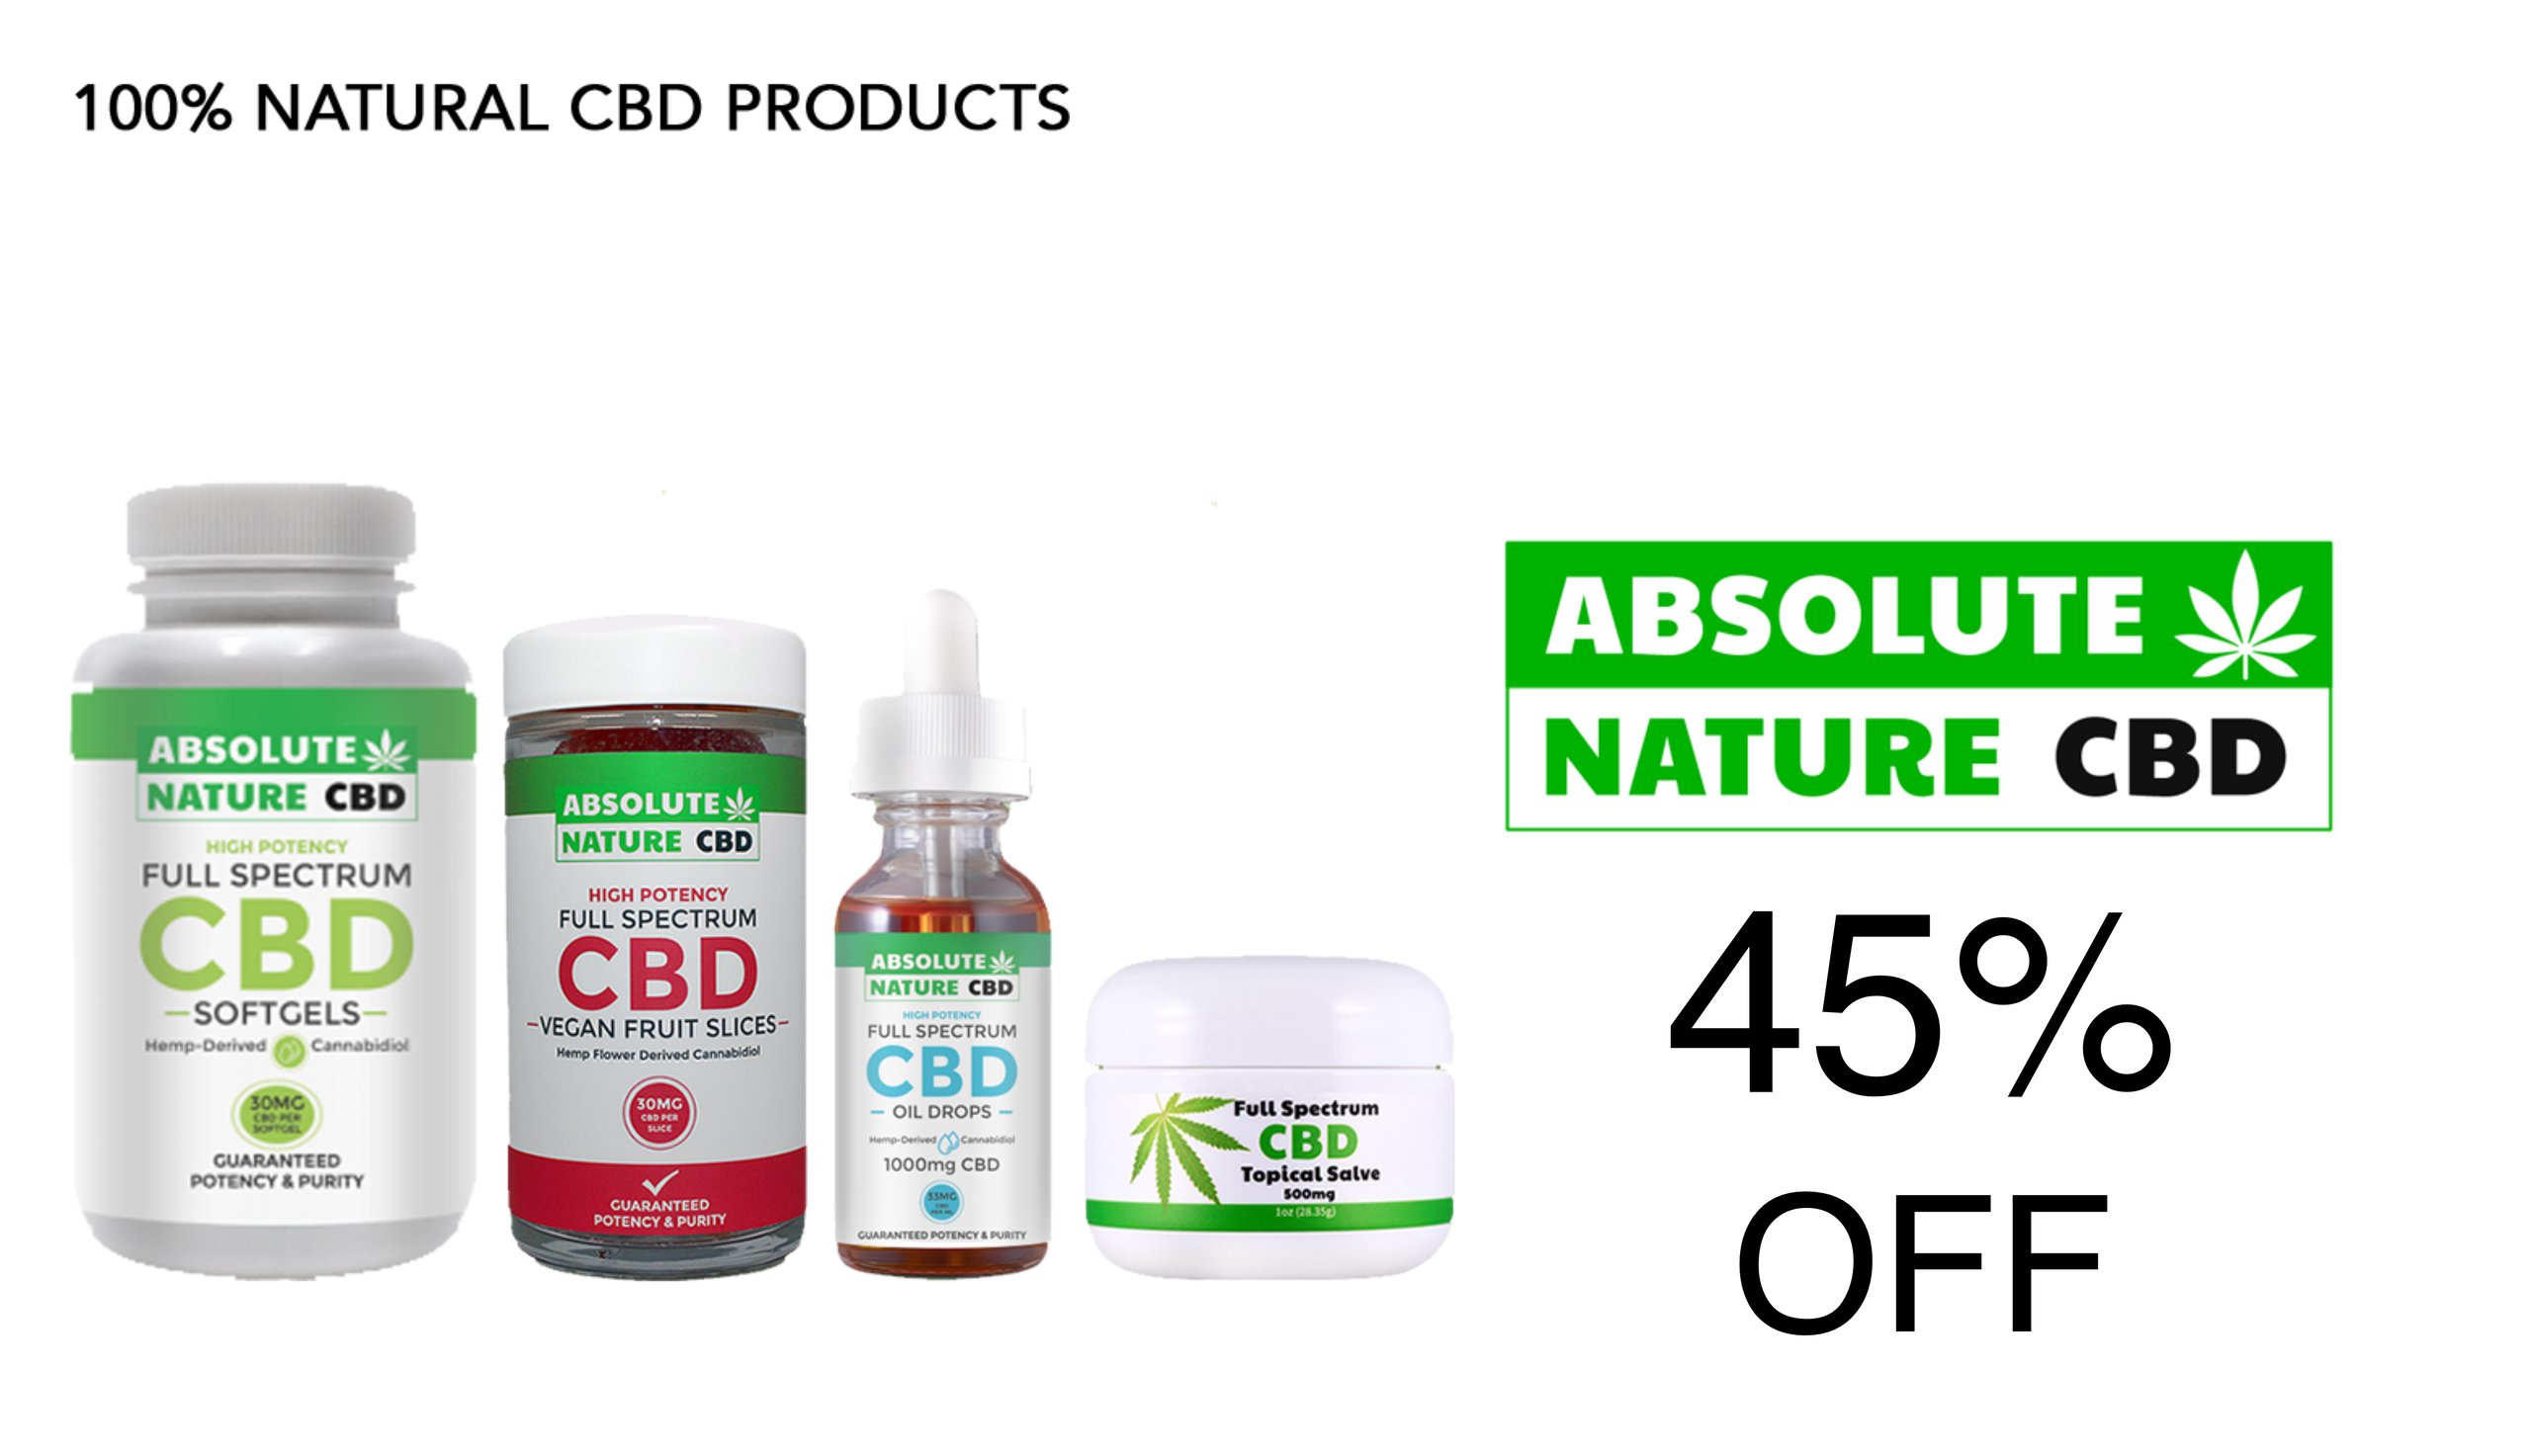 Absolute Nature CBD Coupon Code - 45 Percent Off - Save On Cannabis